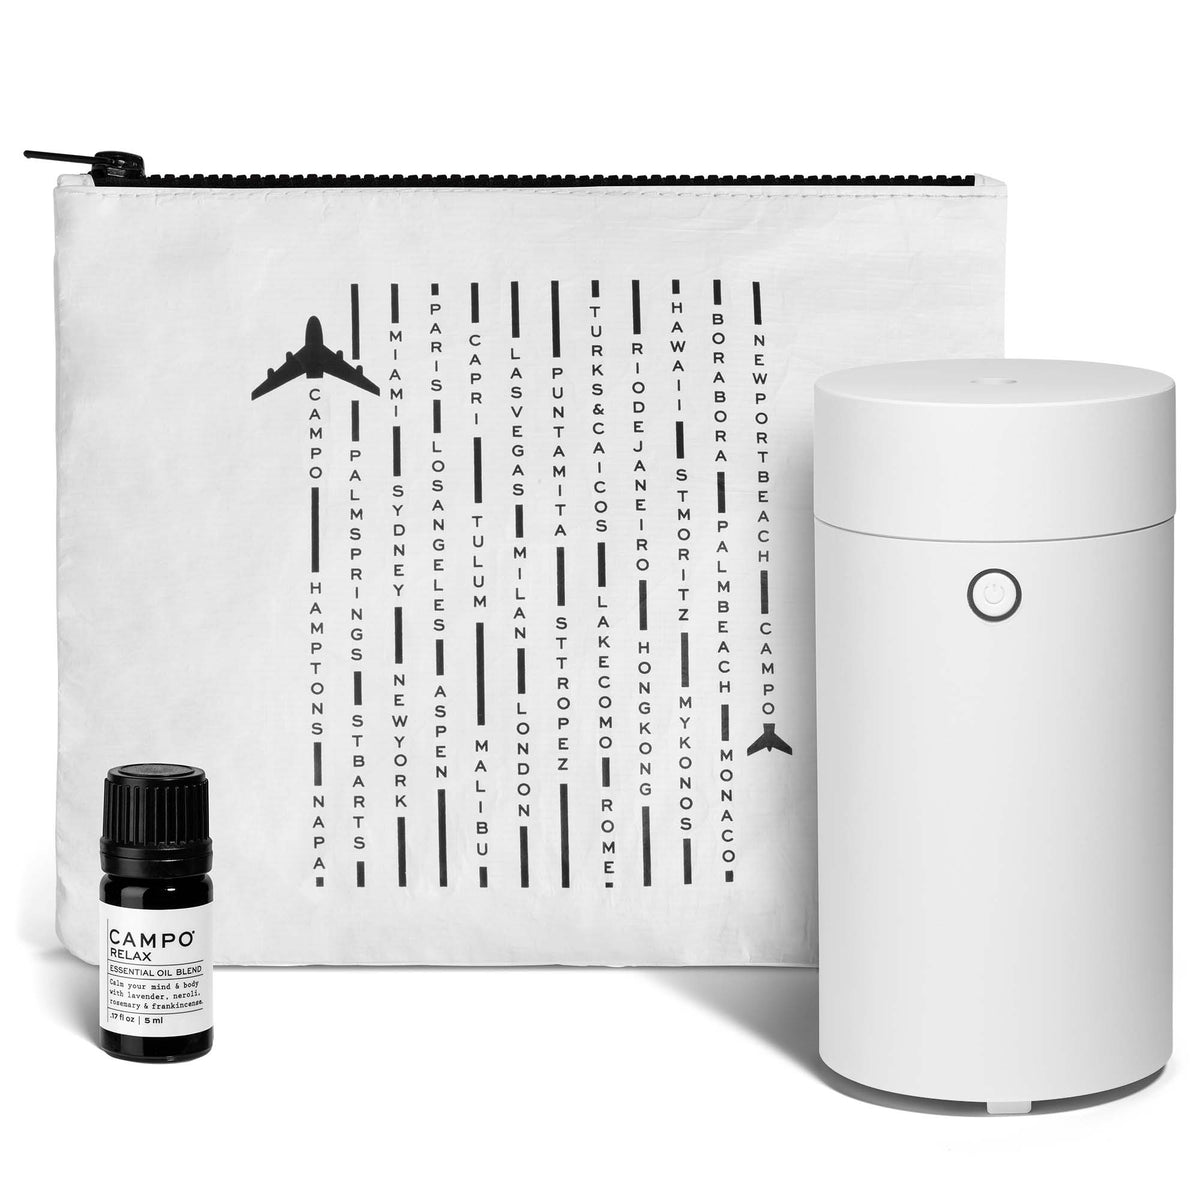 RELAX Essential Oil Diffuser Kit - CLOUD WHITE Travel Diffuser + RELAX Blend